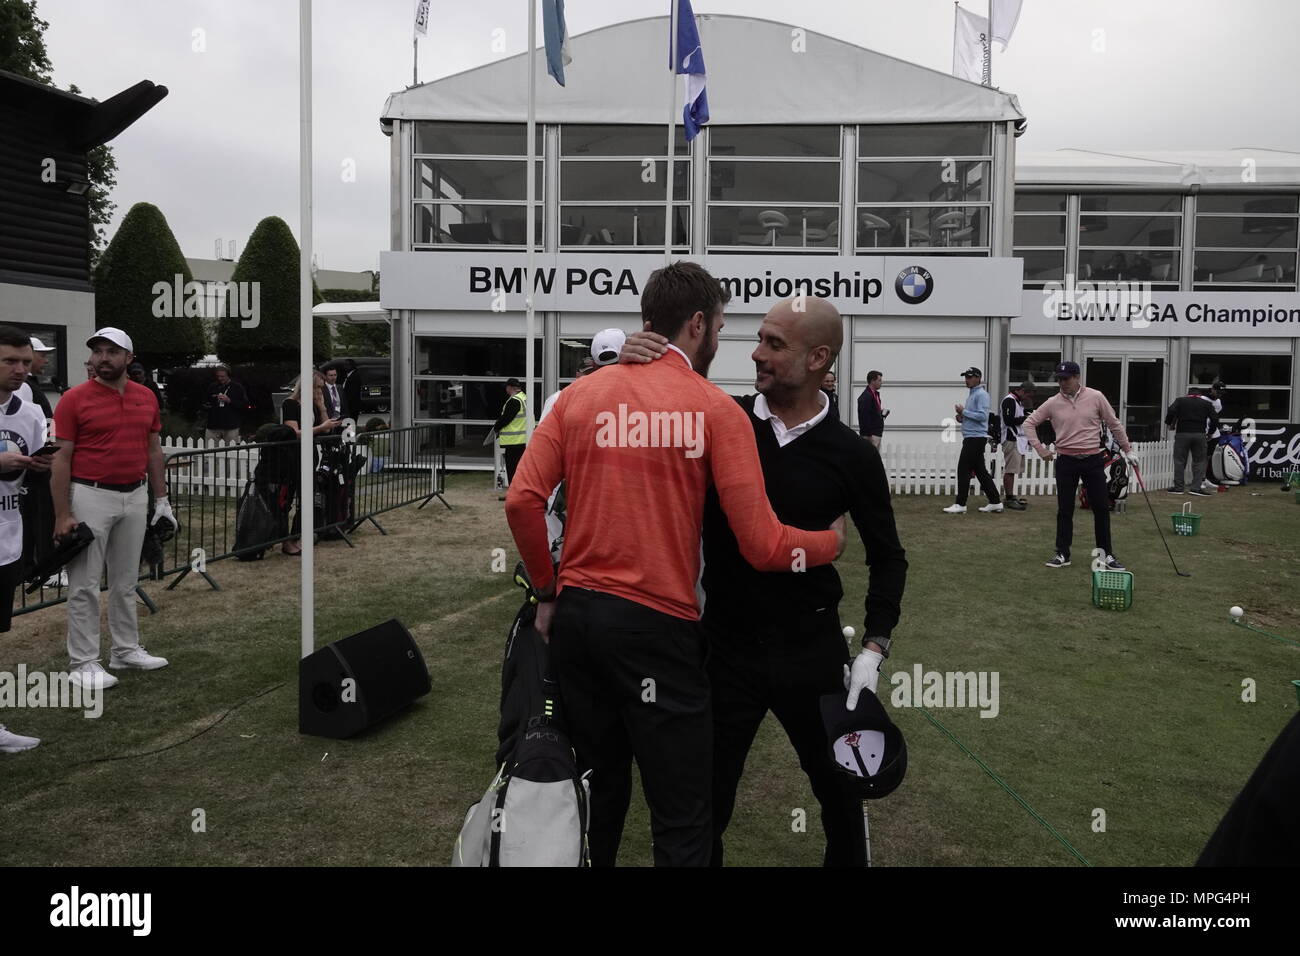 Wentworth, Surrey, UK., 23rd May, 2018  Michael Carrick, Manchester United player, greets fierce rival Manchester City boss Pep Guardiola as they arrive on the range at the BMW.PGA ProAM golf Championship. Credit: Motofoto/Alamy Live News Stock Photo